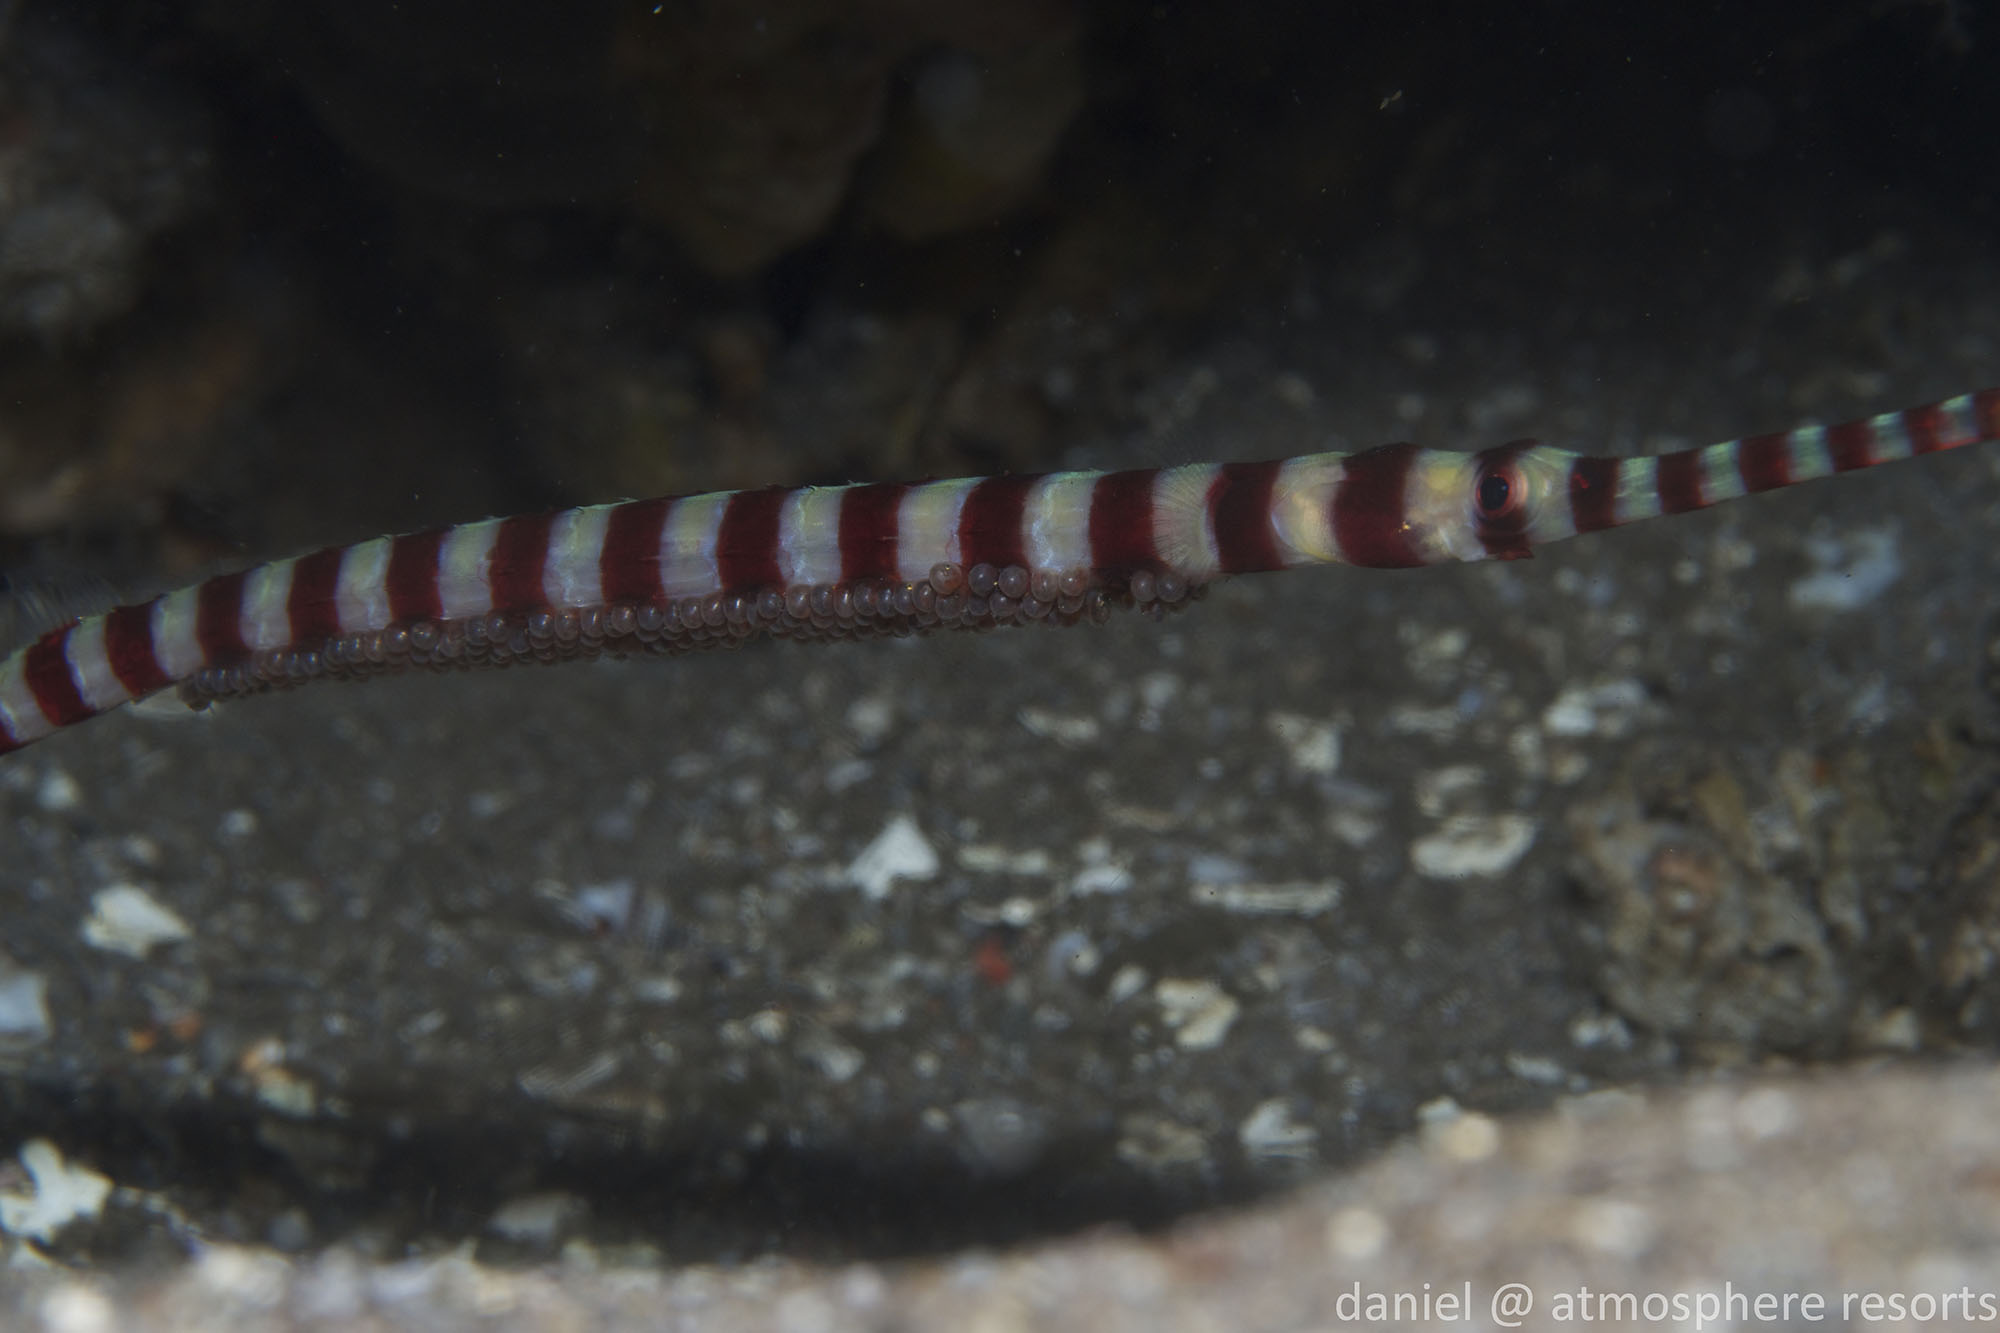 Banded pipefish with eggs in Dauin, Dumaguete, Philippines. Photo by Daniel Geary at Atmosphere Resort.